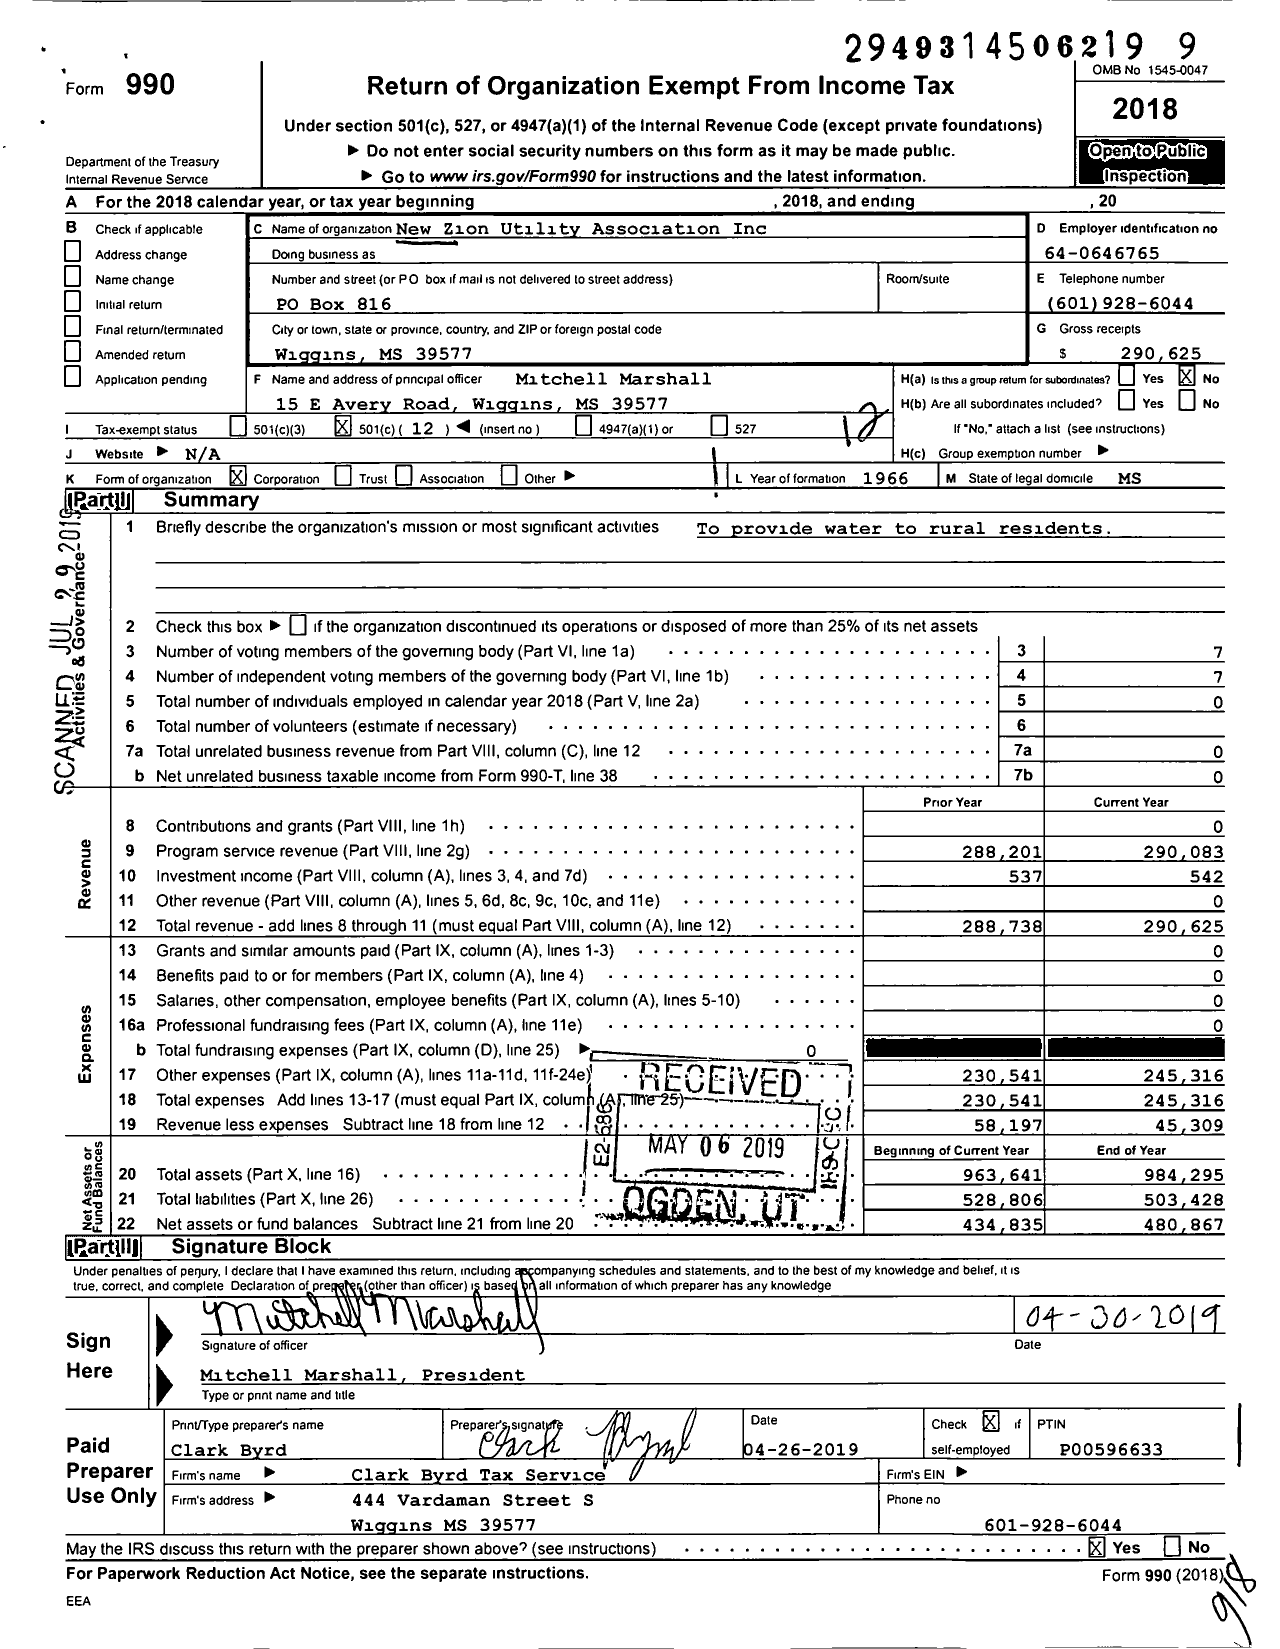 Image of first page of 2018 Form 990O for New Zion Utility Association